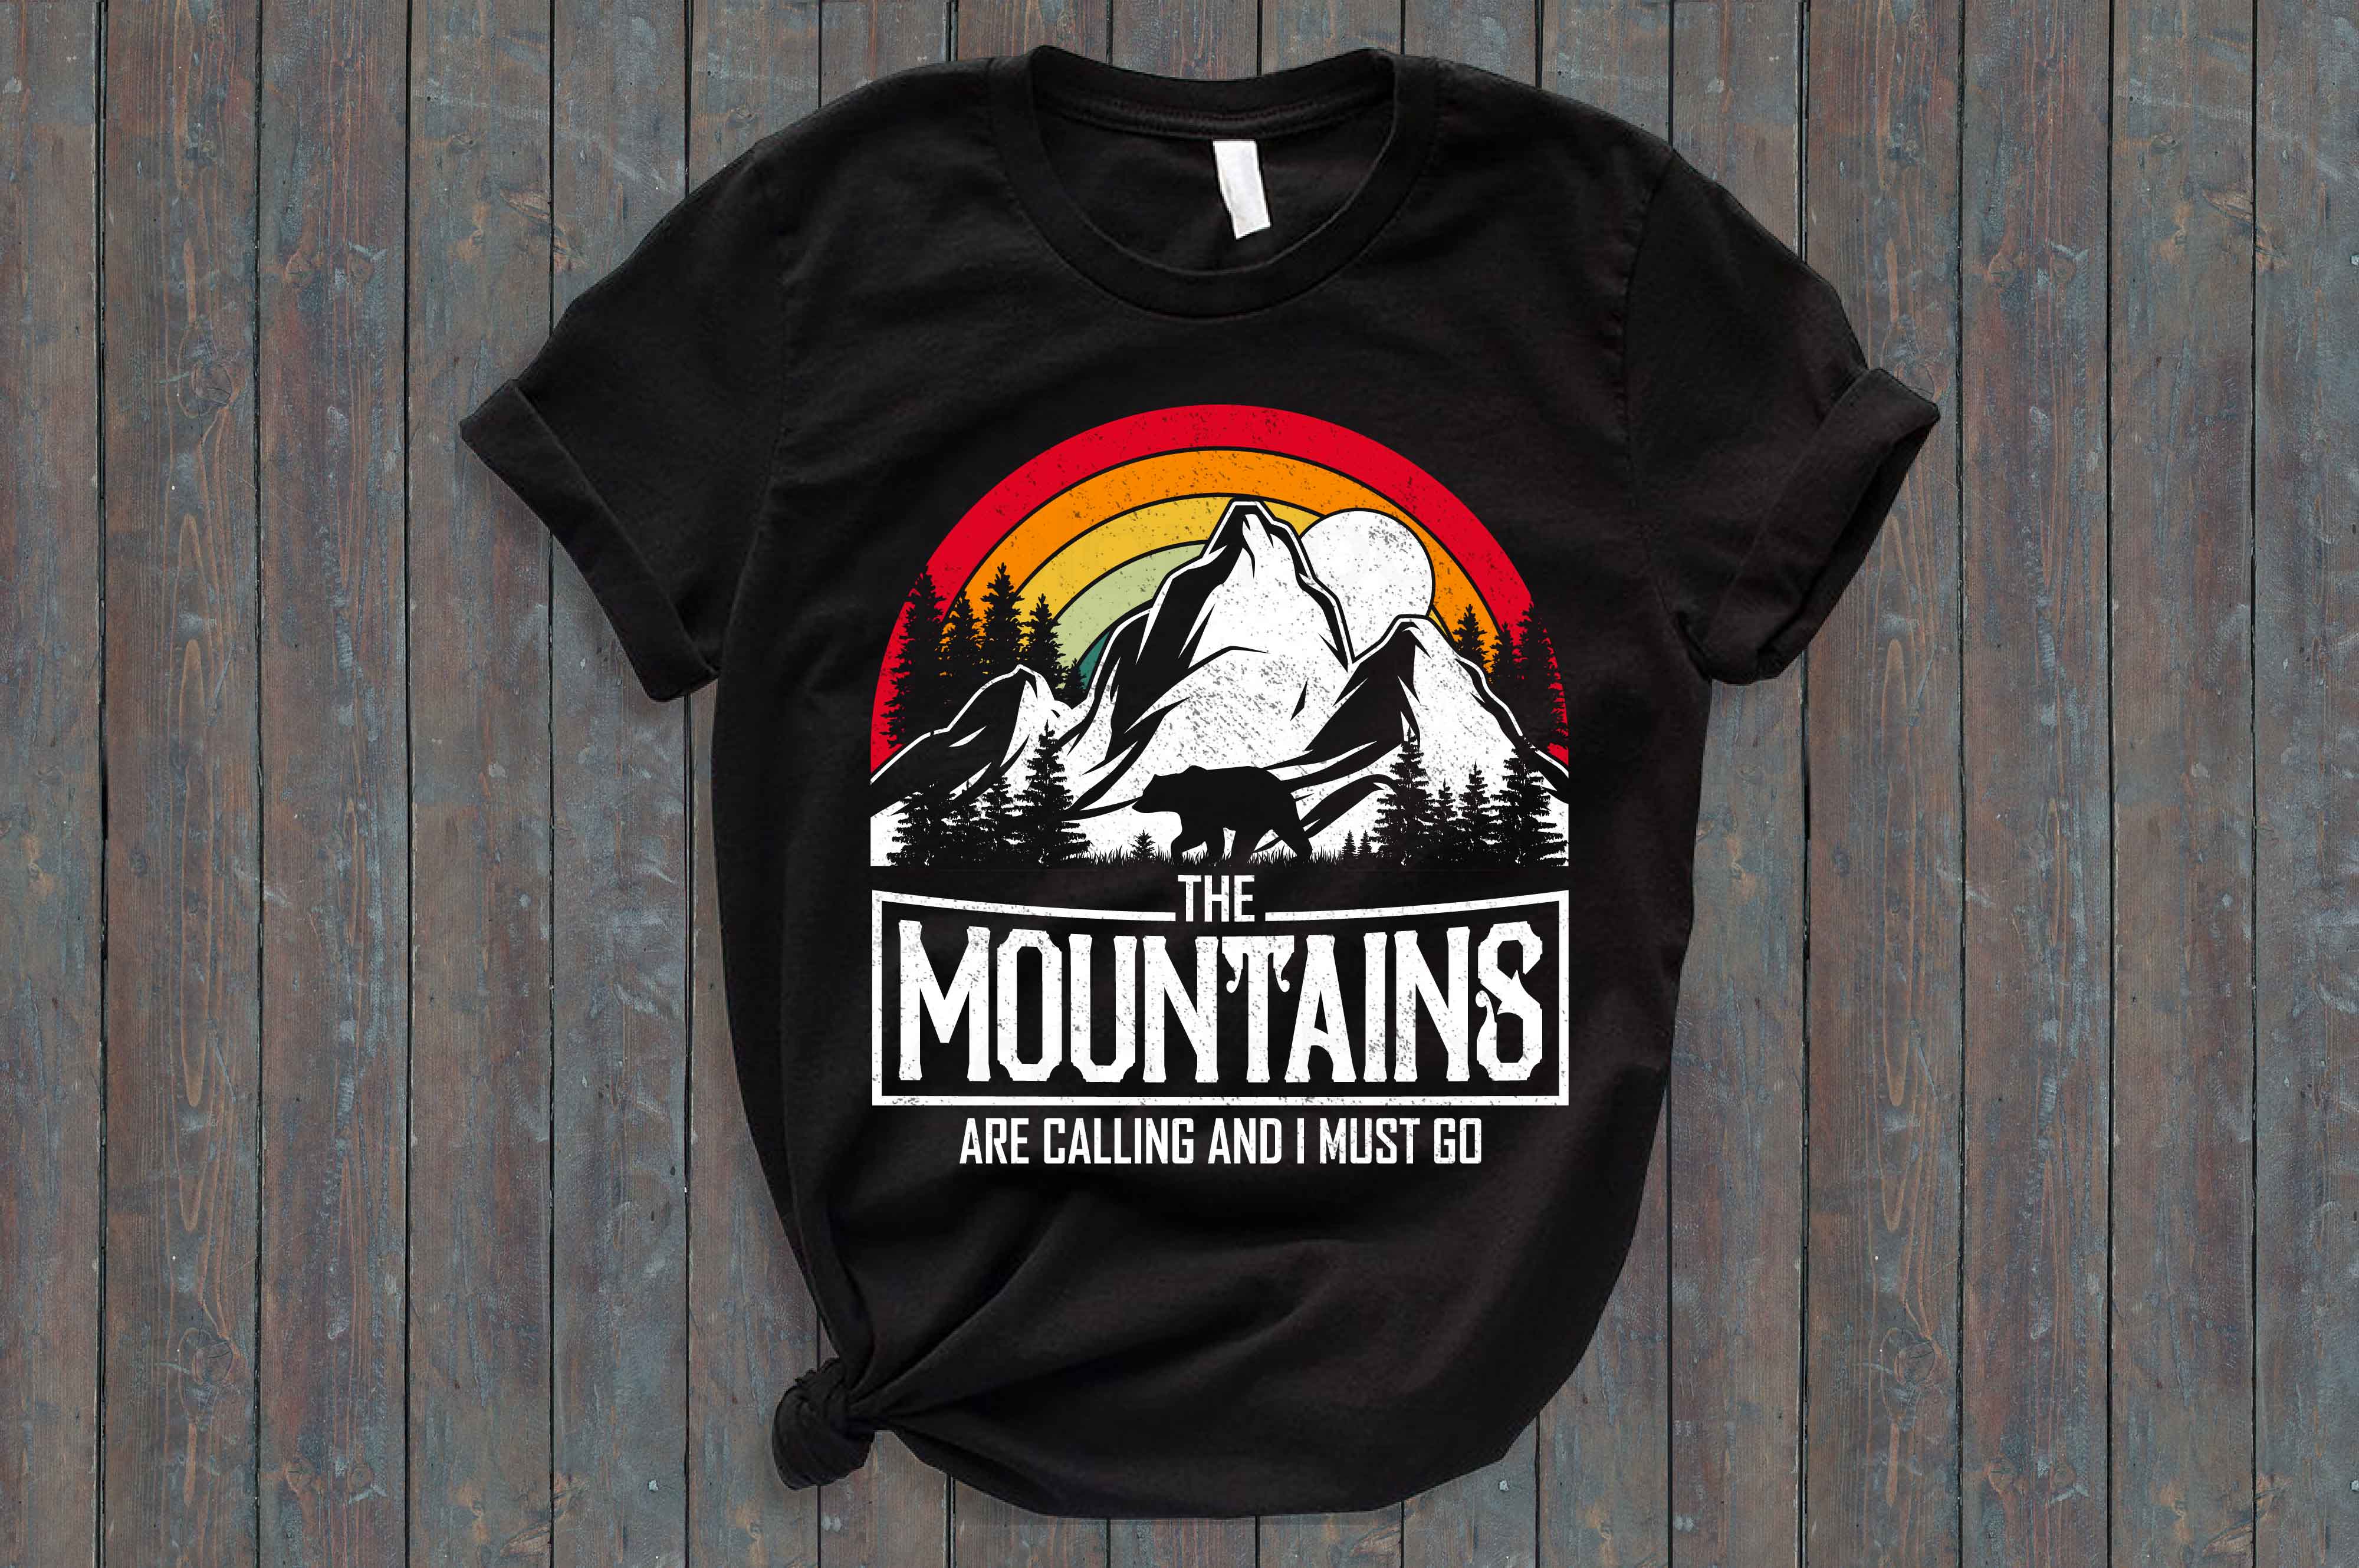 Black t - shirt that says the mountains are calling and must go.